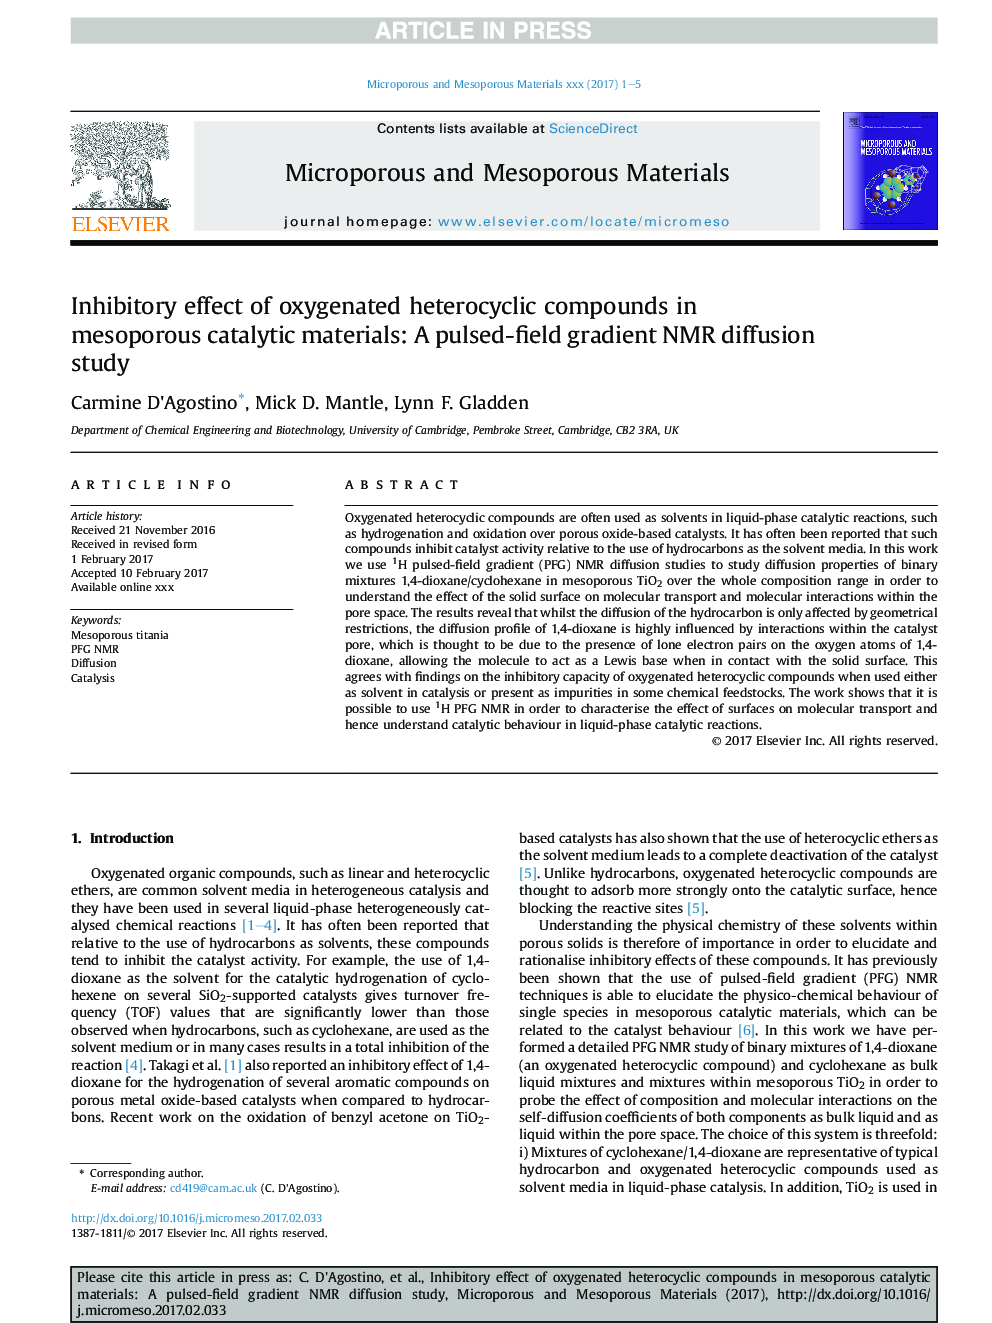 Inhibitory effect of oxygenated heterocyclic compounds in mesoporous catalytic materials: A pulsed-field gradient NMR diffusion study